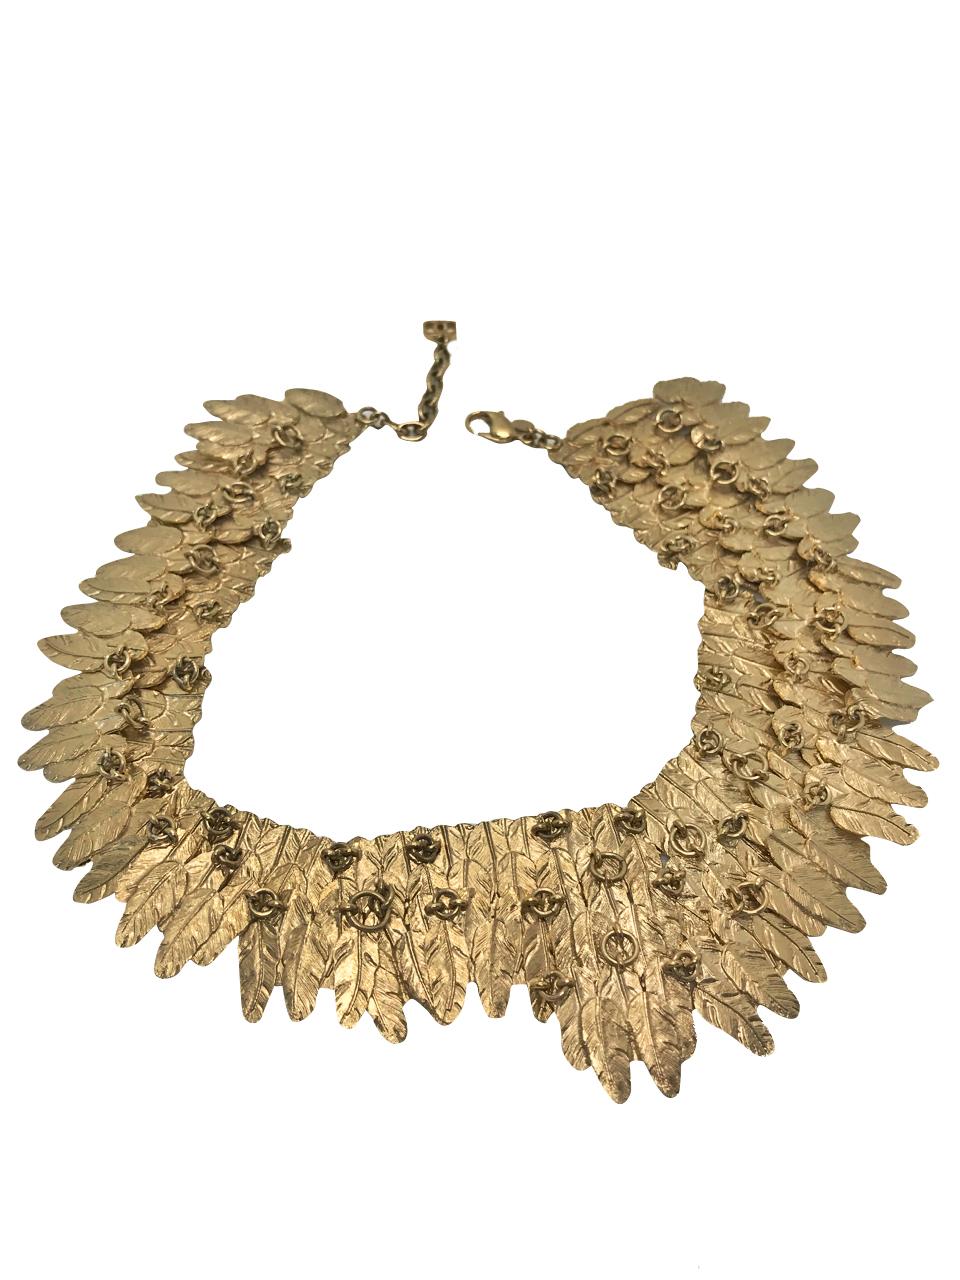 Chanel Feather Collar Choker Necklace.  Made in 2008 for the Autumn Winter collection.  Simply breath taking piece, really difficult to find now.  

Featured in the New York Museum of Art and Design's Exhibition of Fashion Jewellery by Barbara